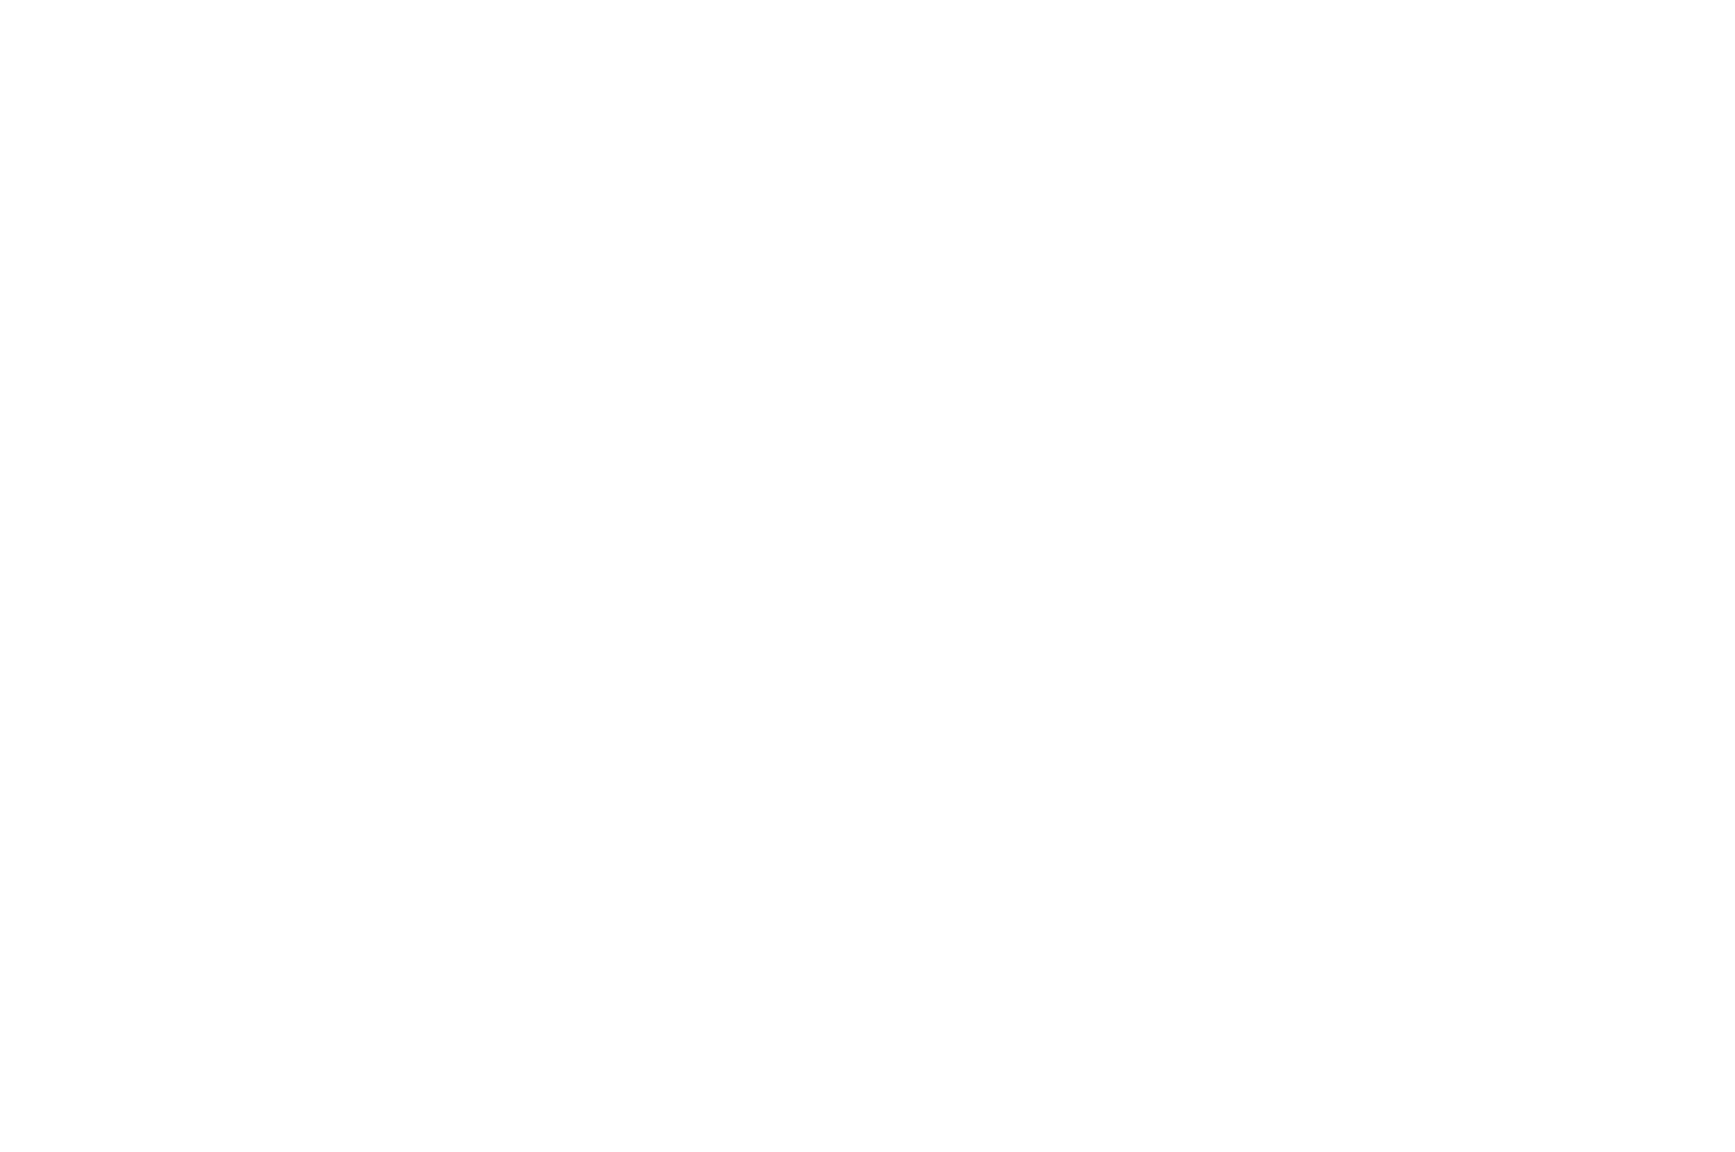 NOMINATED - BEST SHORT FILM USA - NYCIFF 2016 (1).png